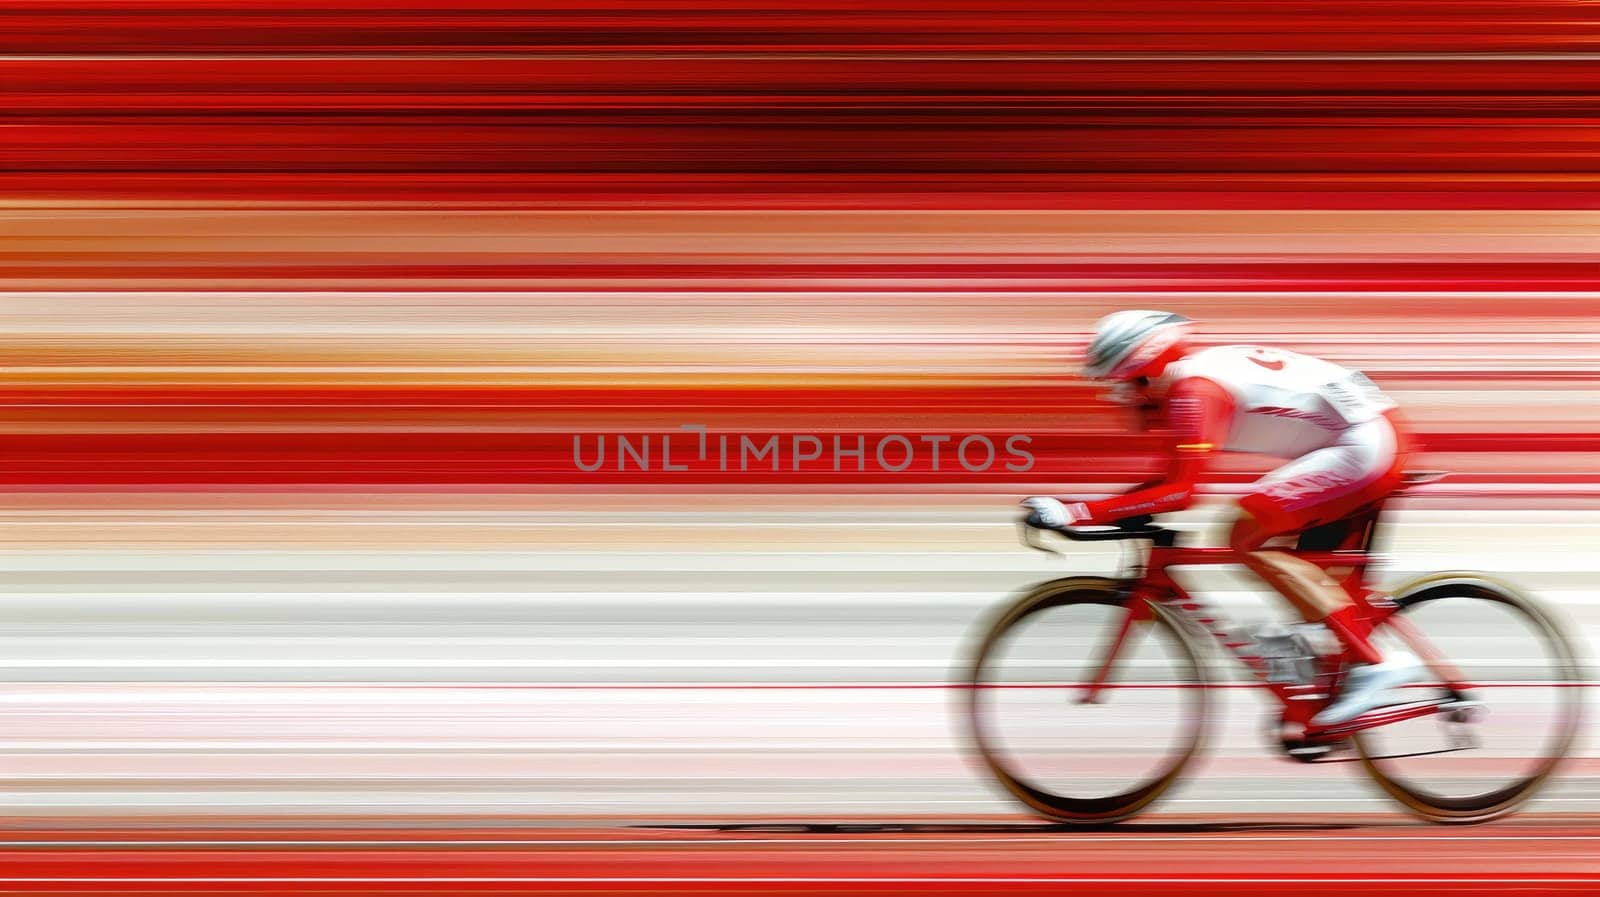 Abstract poster of epic cyclist race in minimalist, A cyclist sport banner.